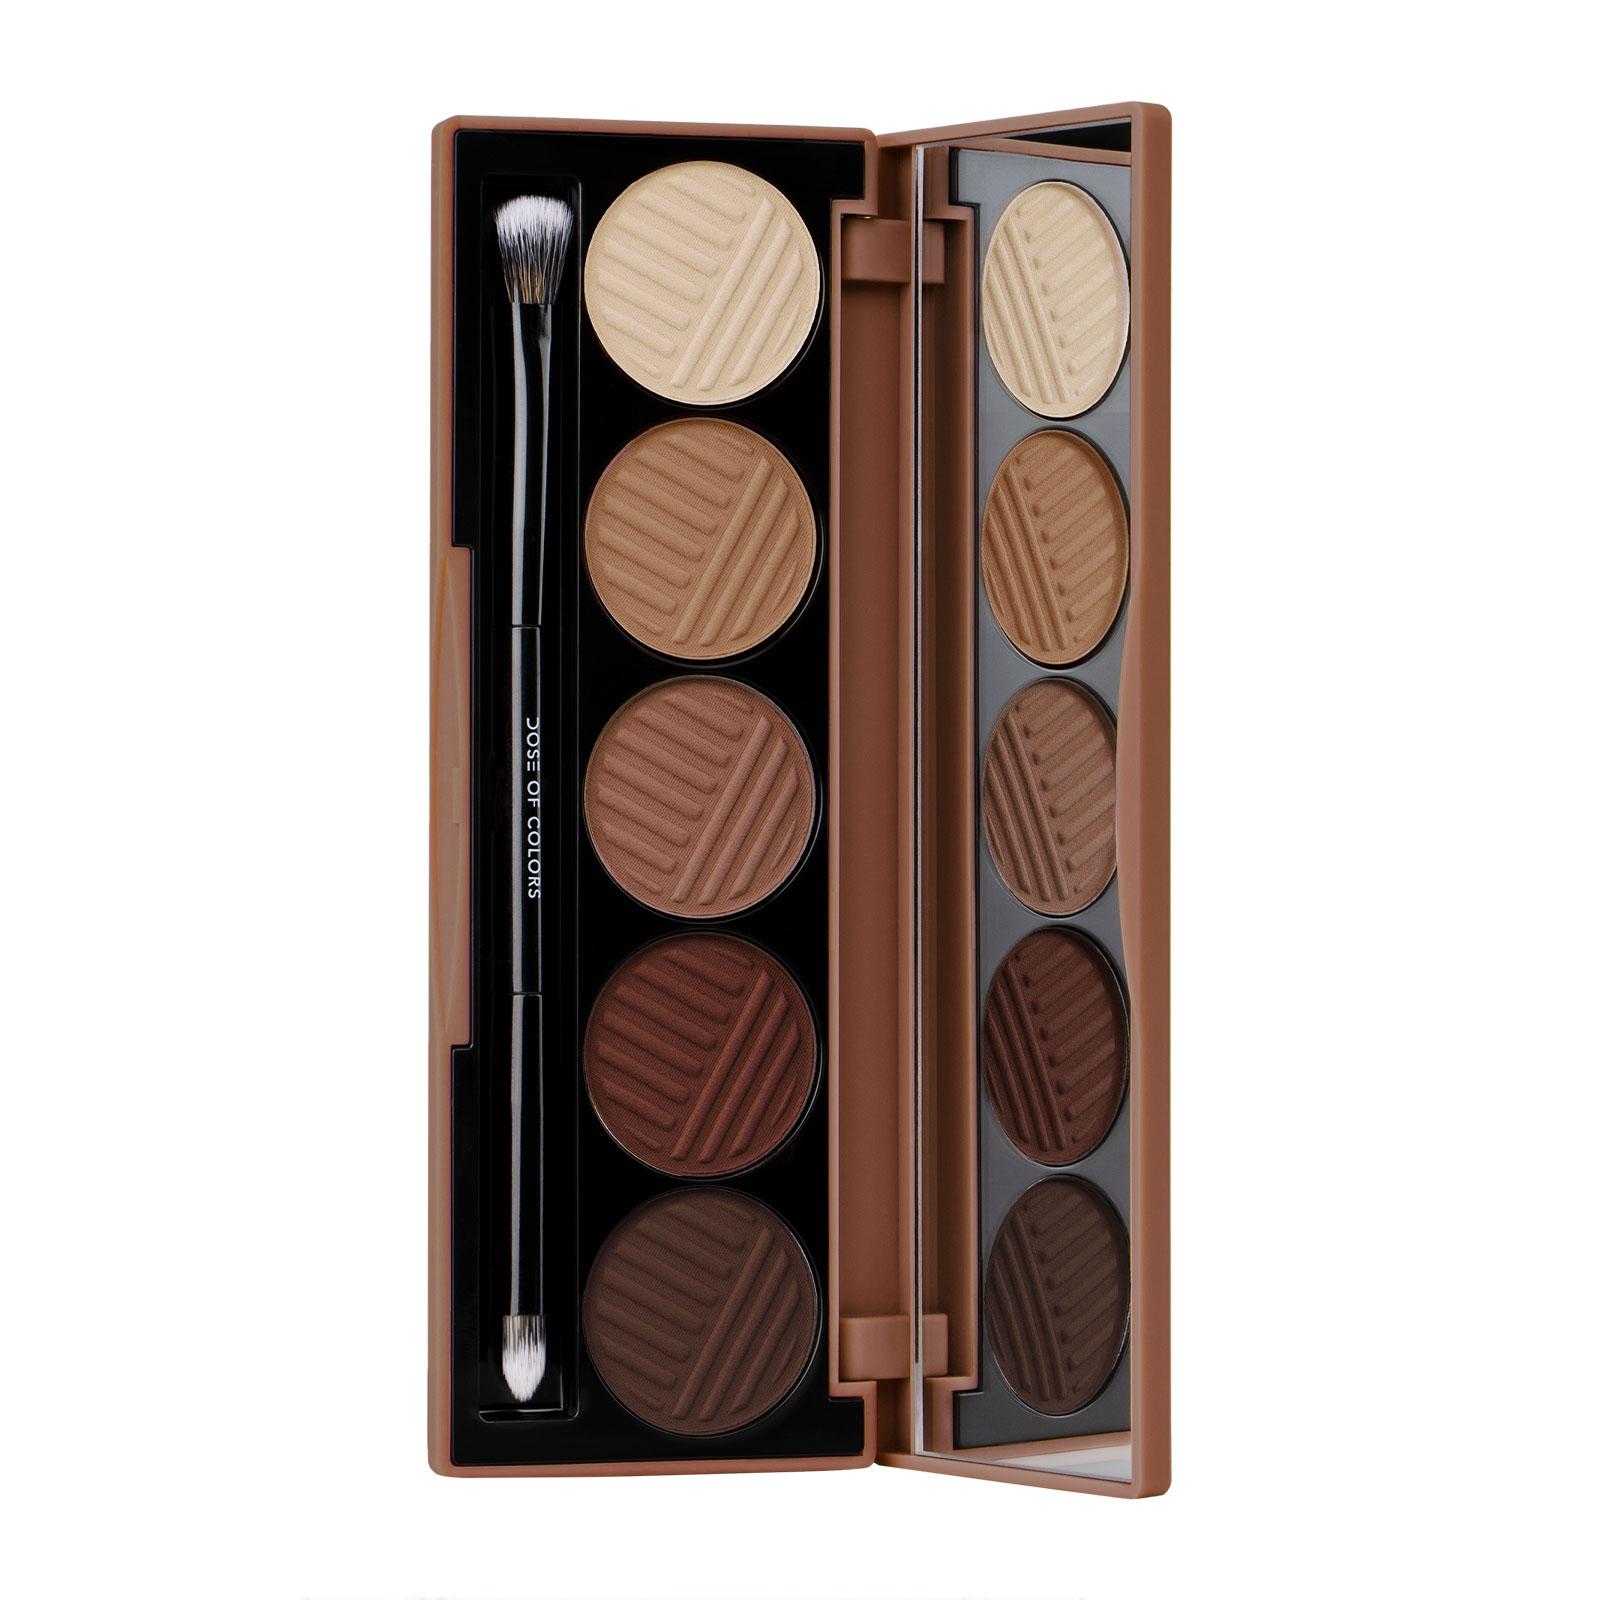 Dose of Colors Baked Browns Eyeshadow Palette